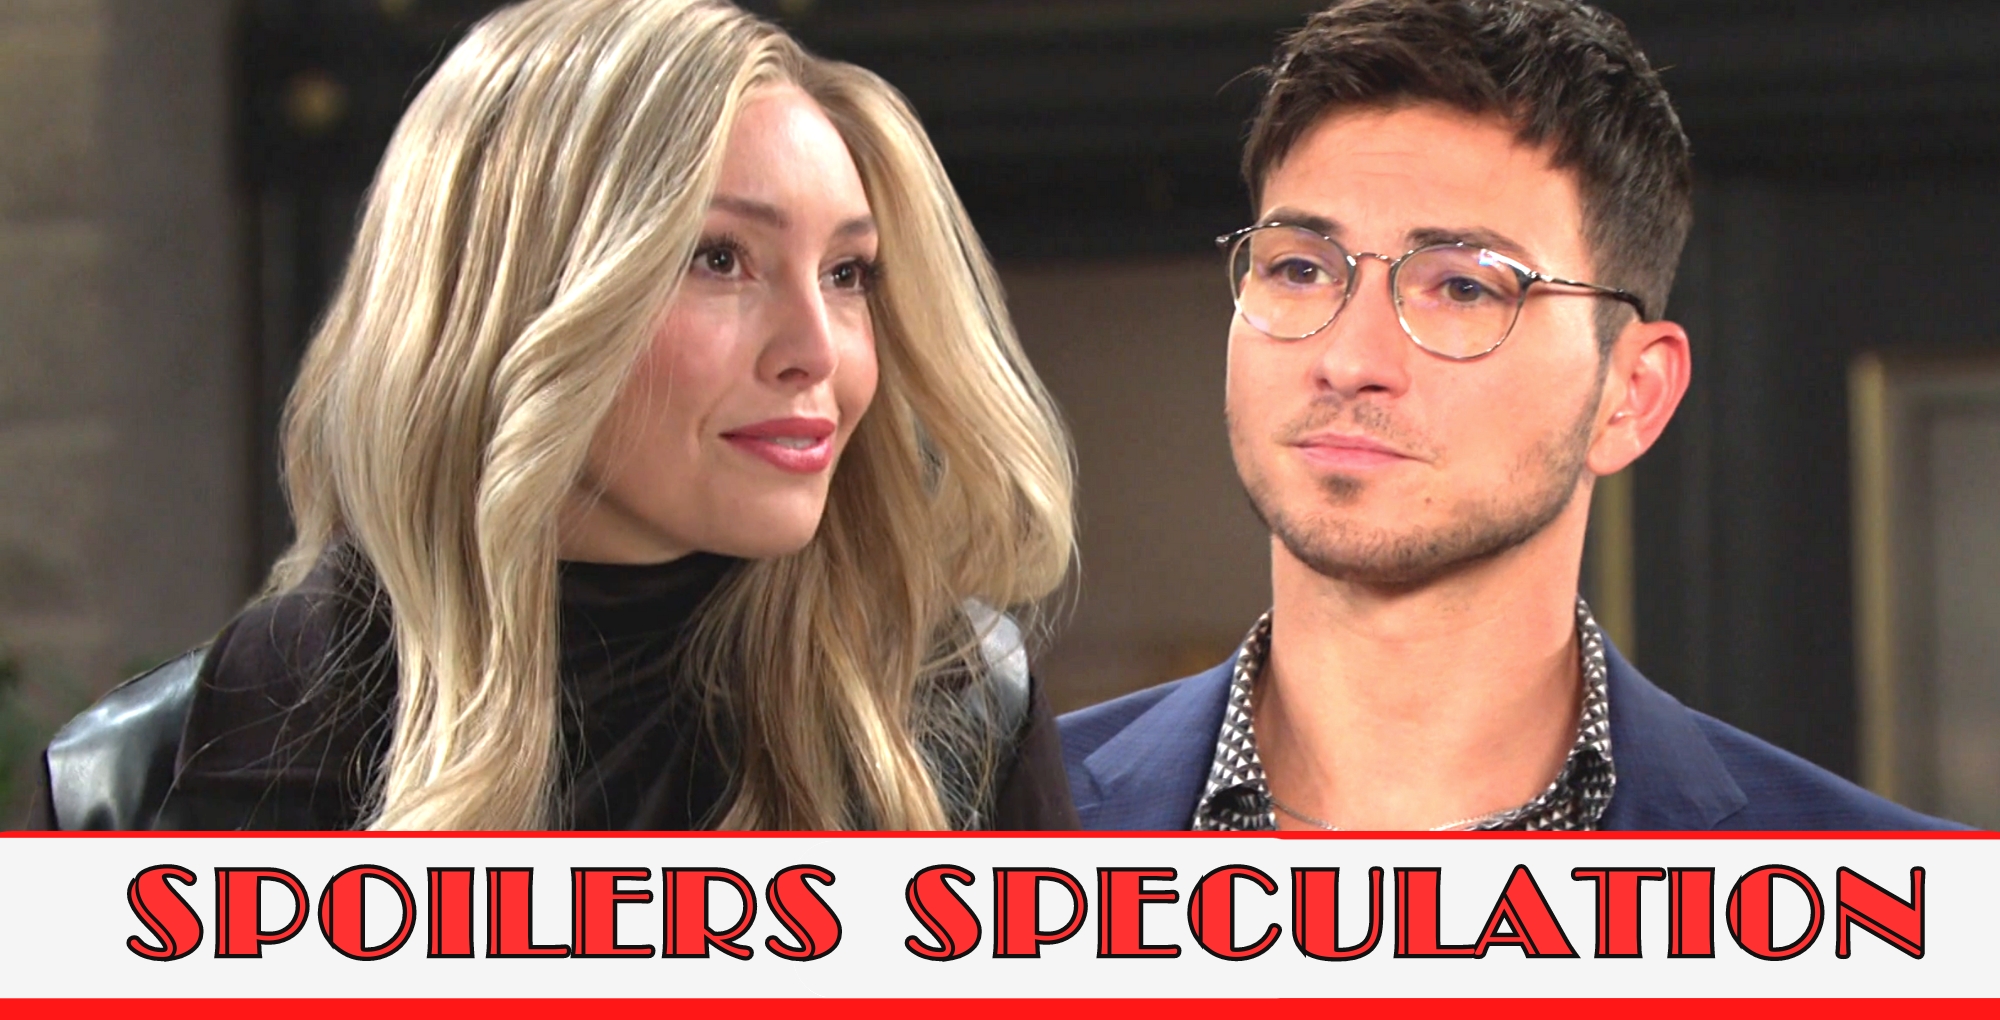 days of our lives spoilers speculation banner over theresa and alex.